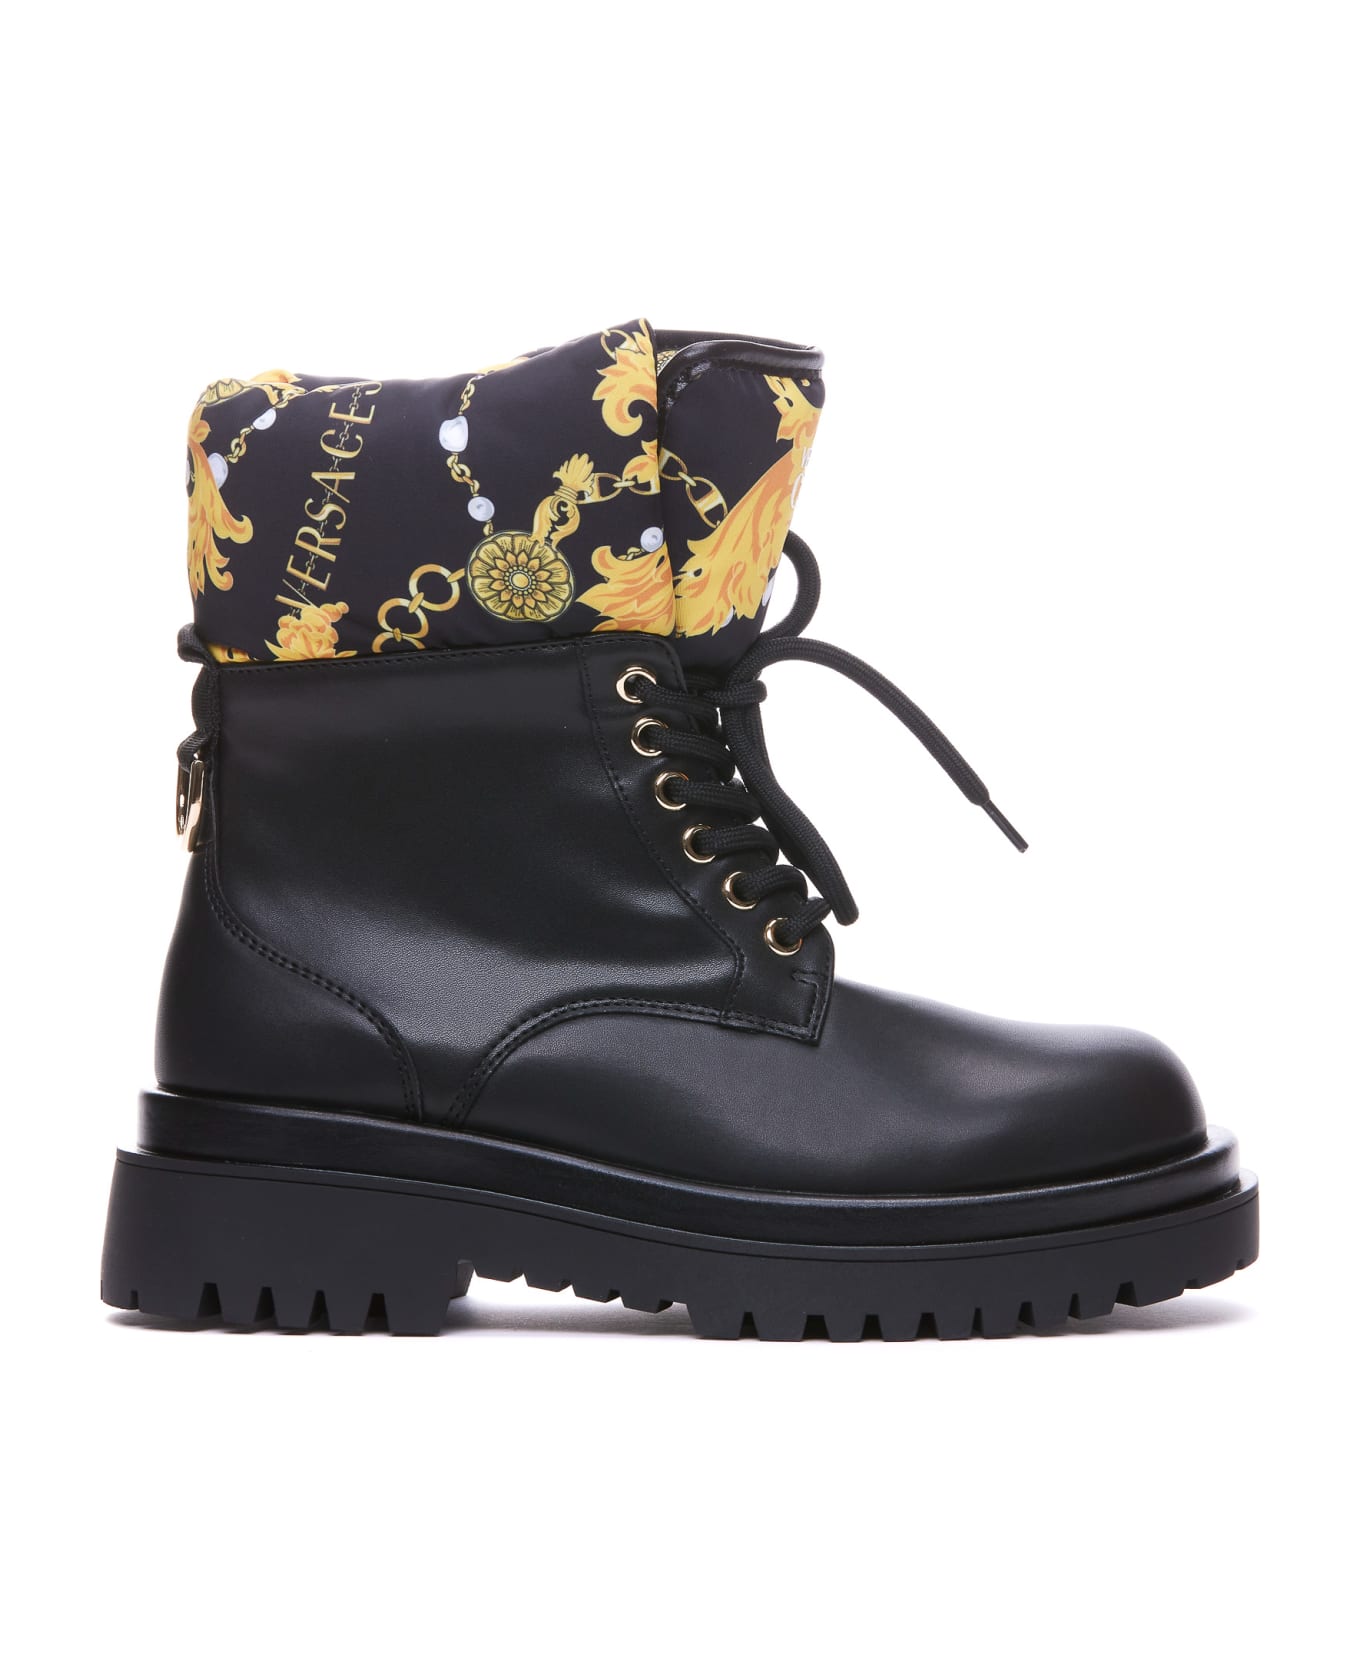 Versace Jeans Couture Couture Chain Ankle Booties - Black ブーツ